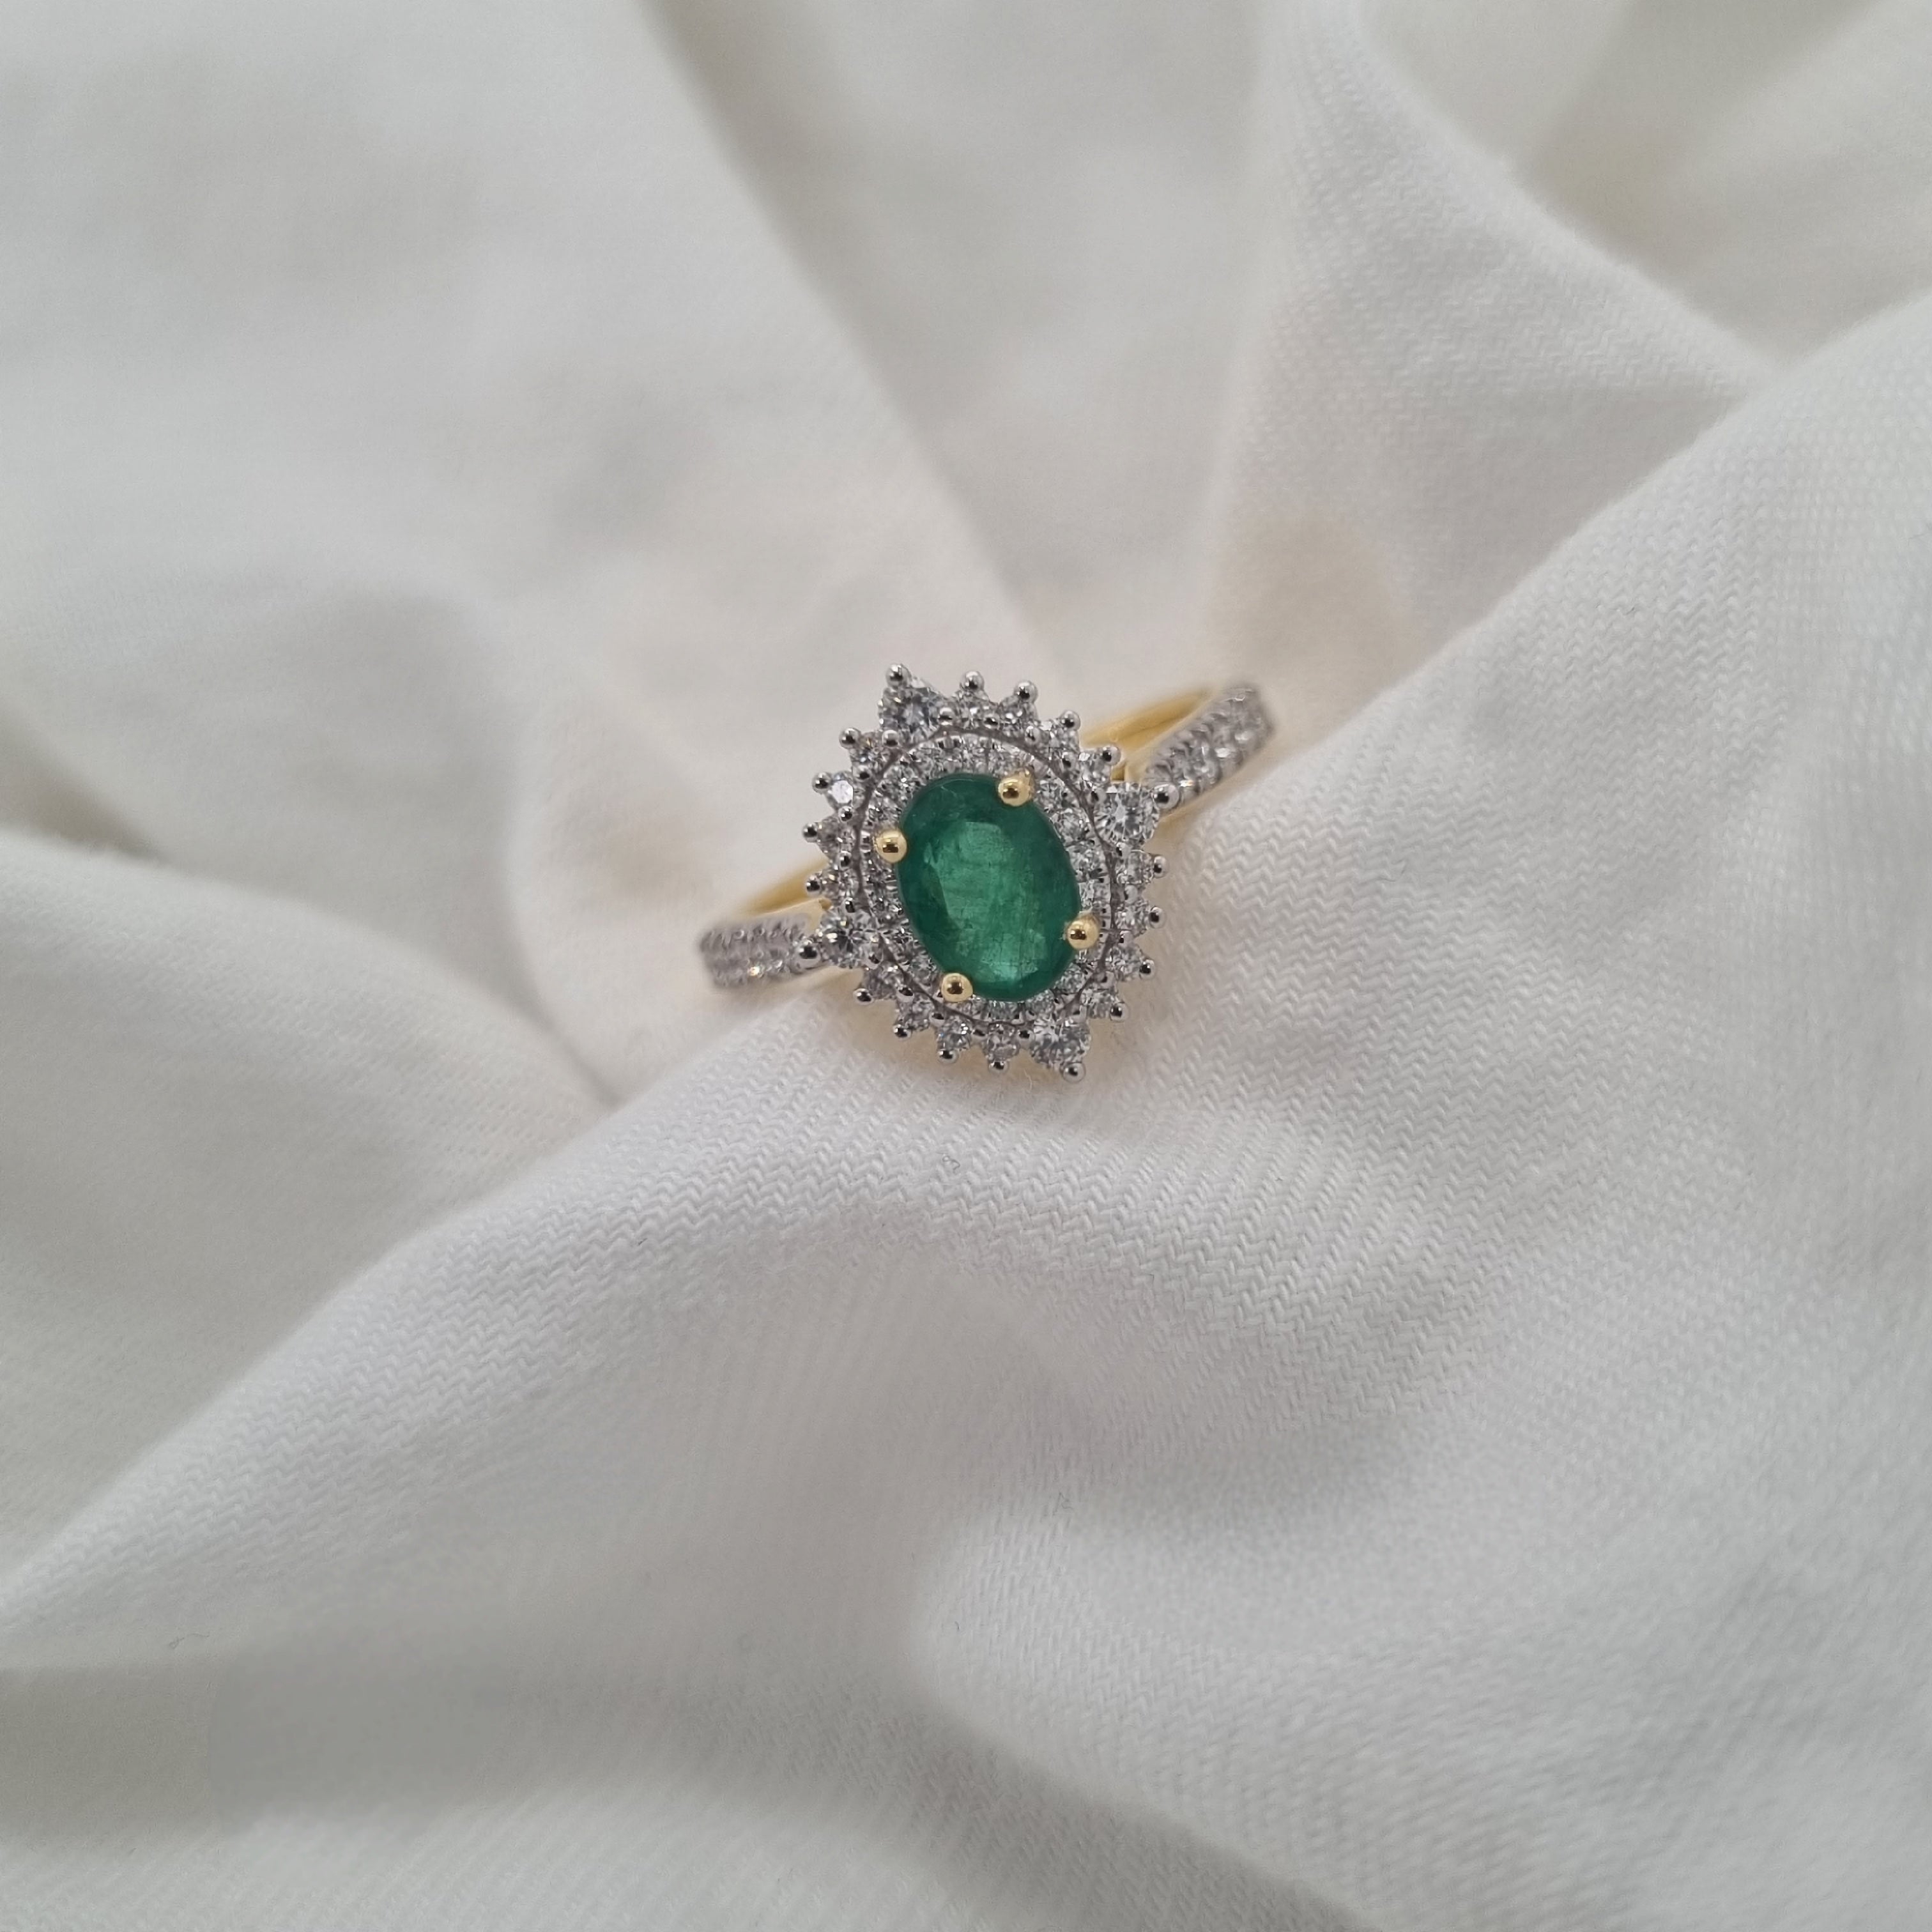 18ct Yellow and White Gold Emerald and Diamond ring